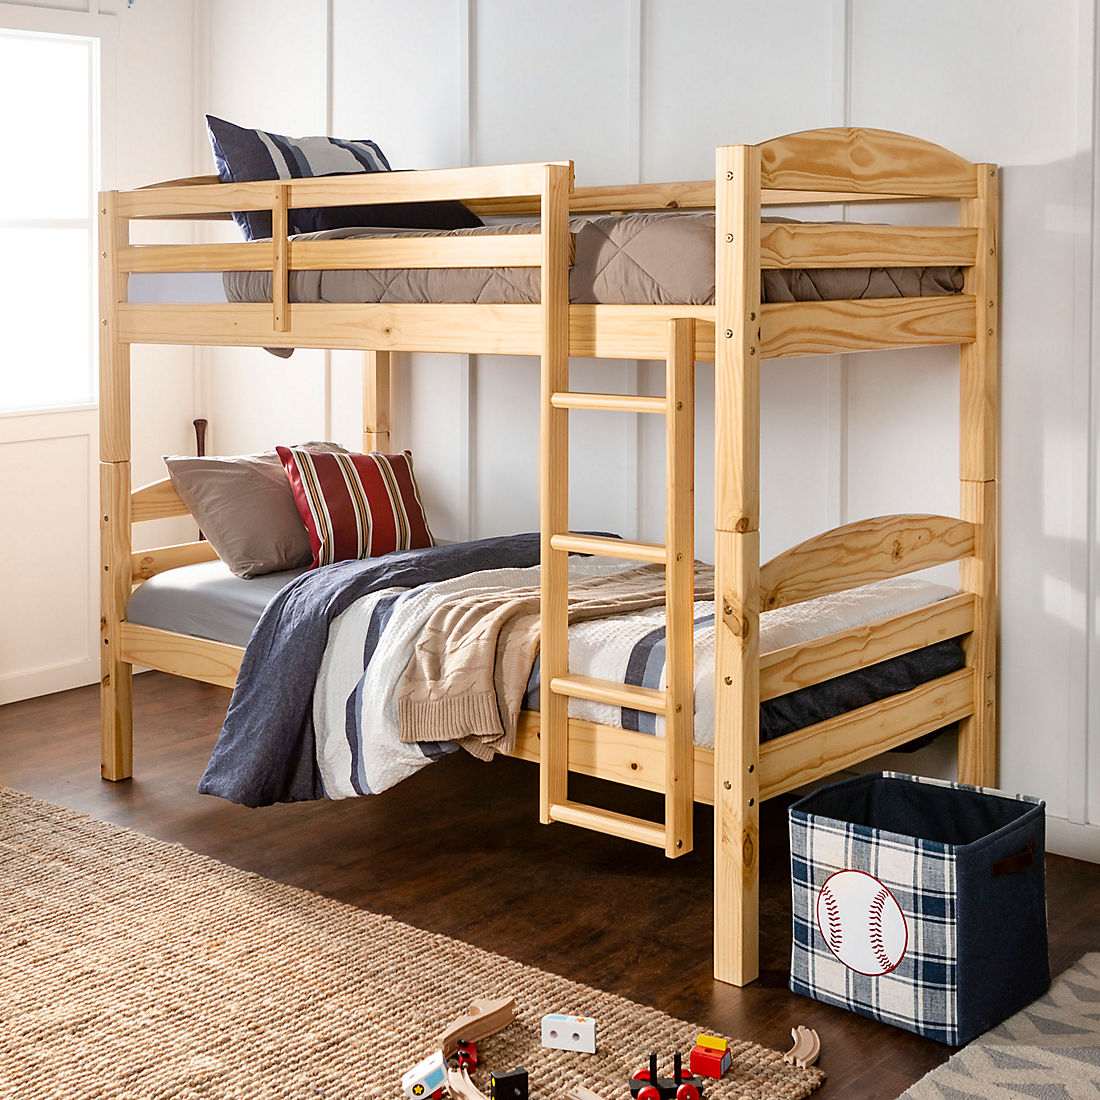 W Trends Twin Size Bunk Bed, Twin Size Bunk Beds